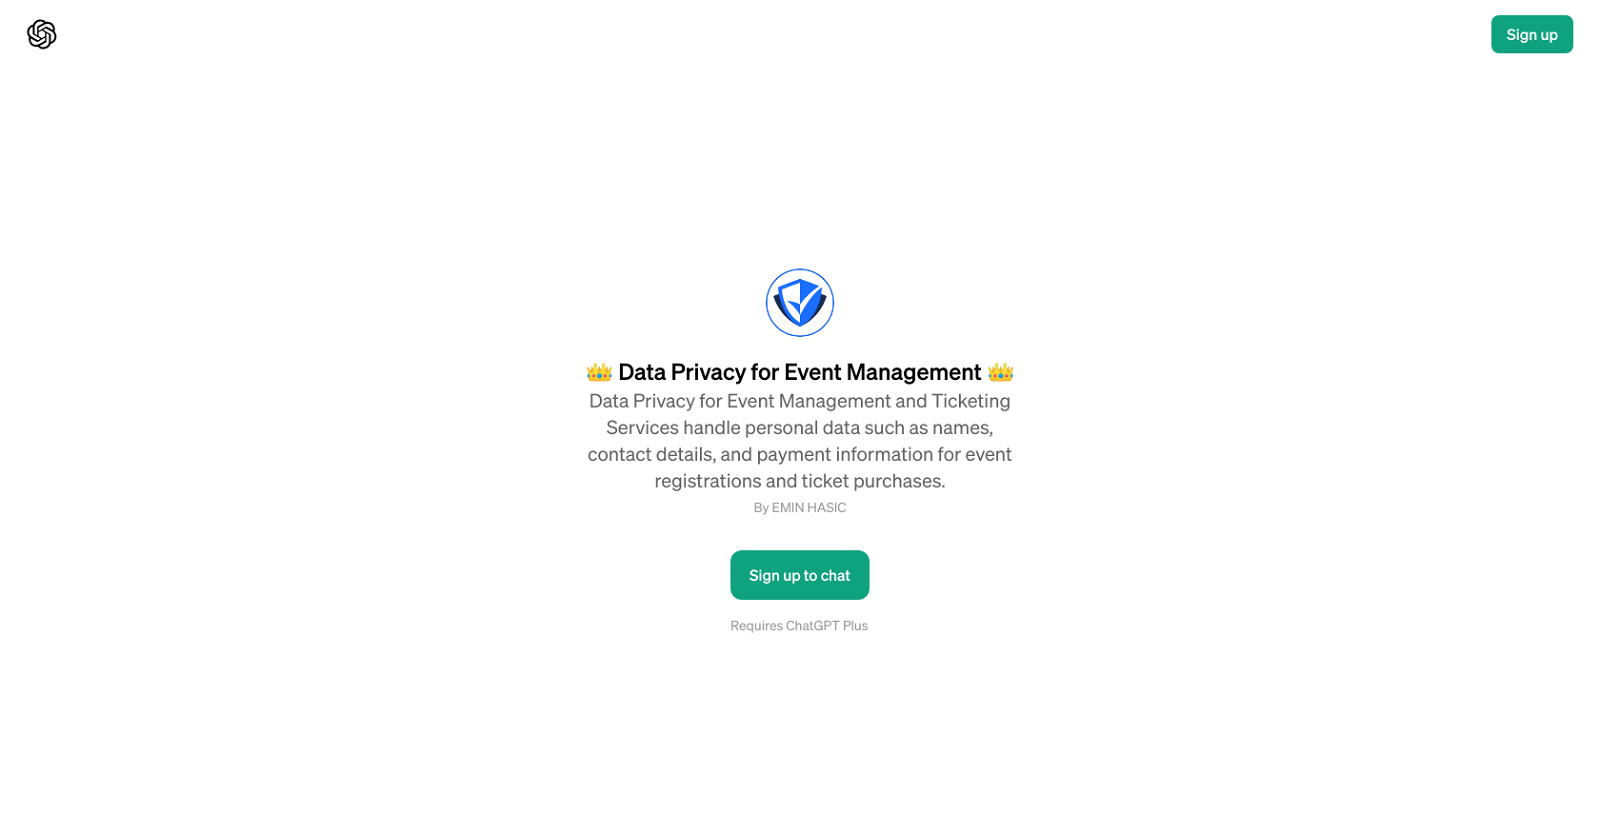 Data Privacy for Event Management GPT website